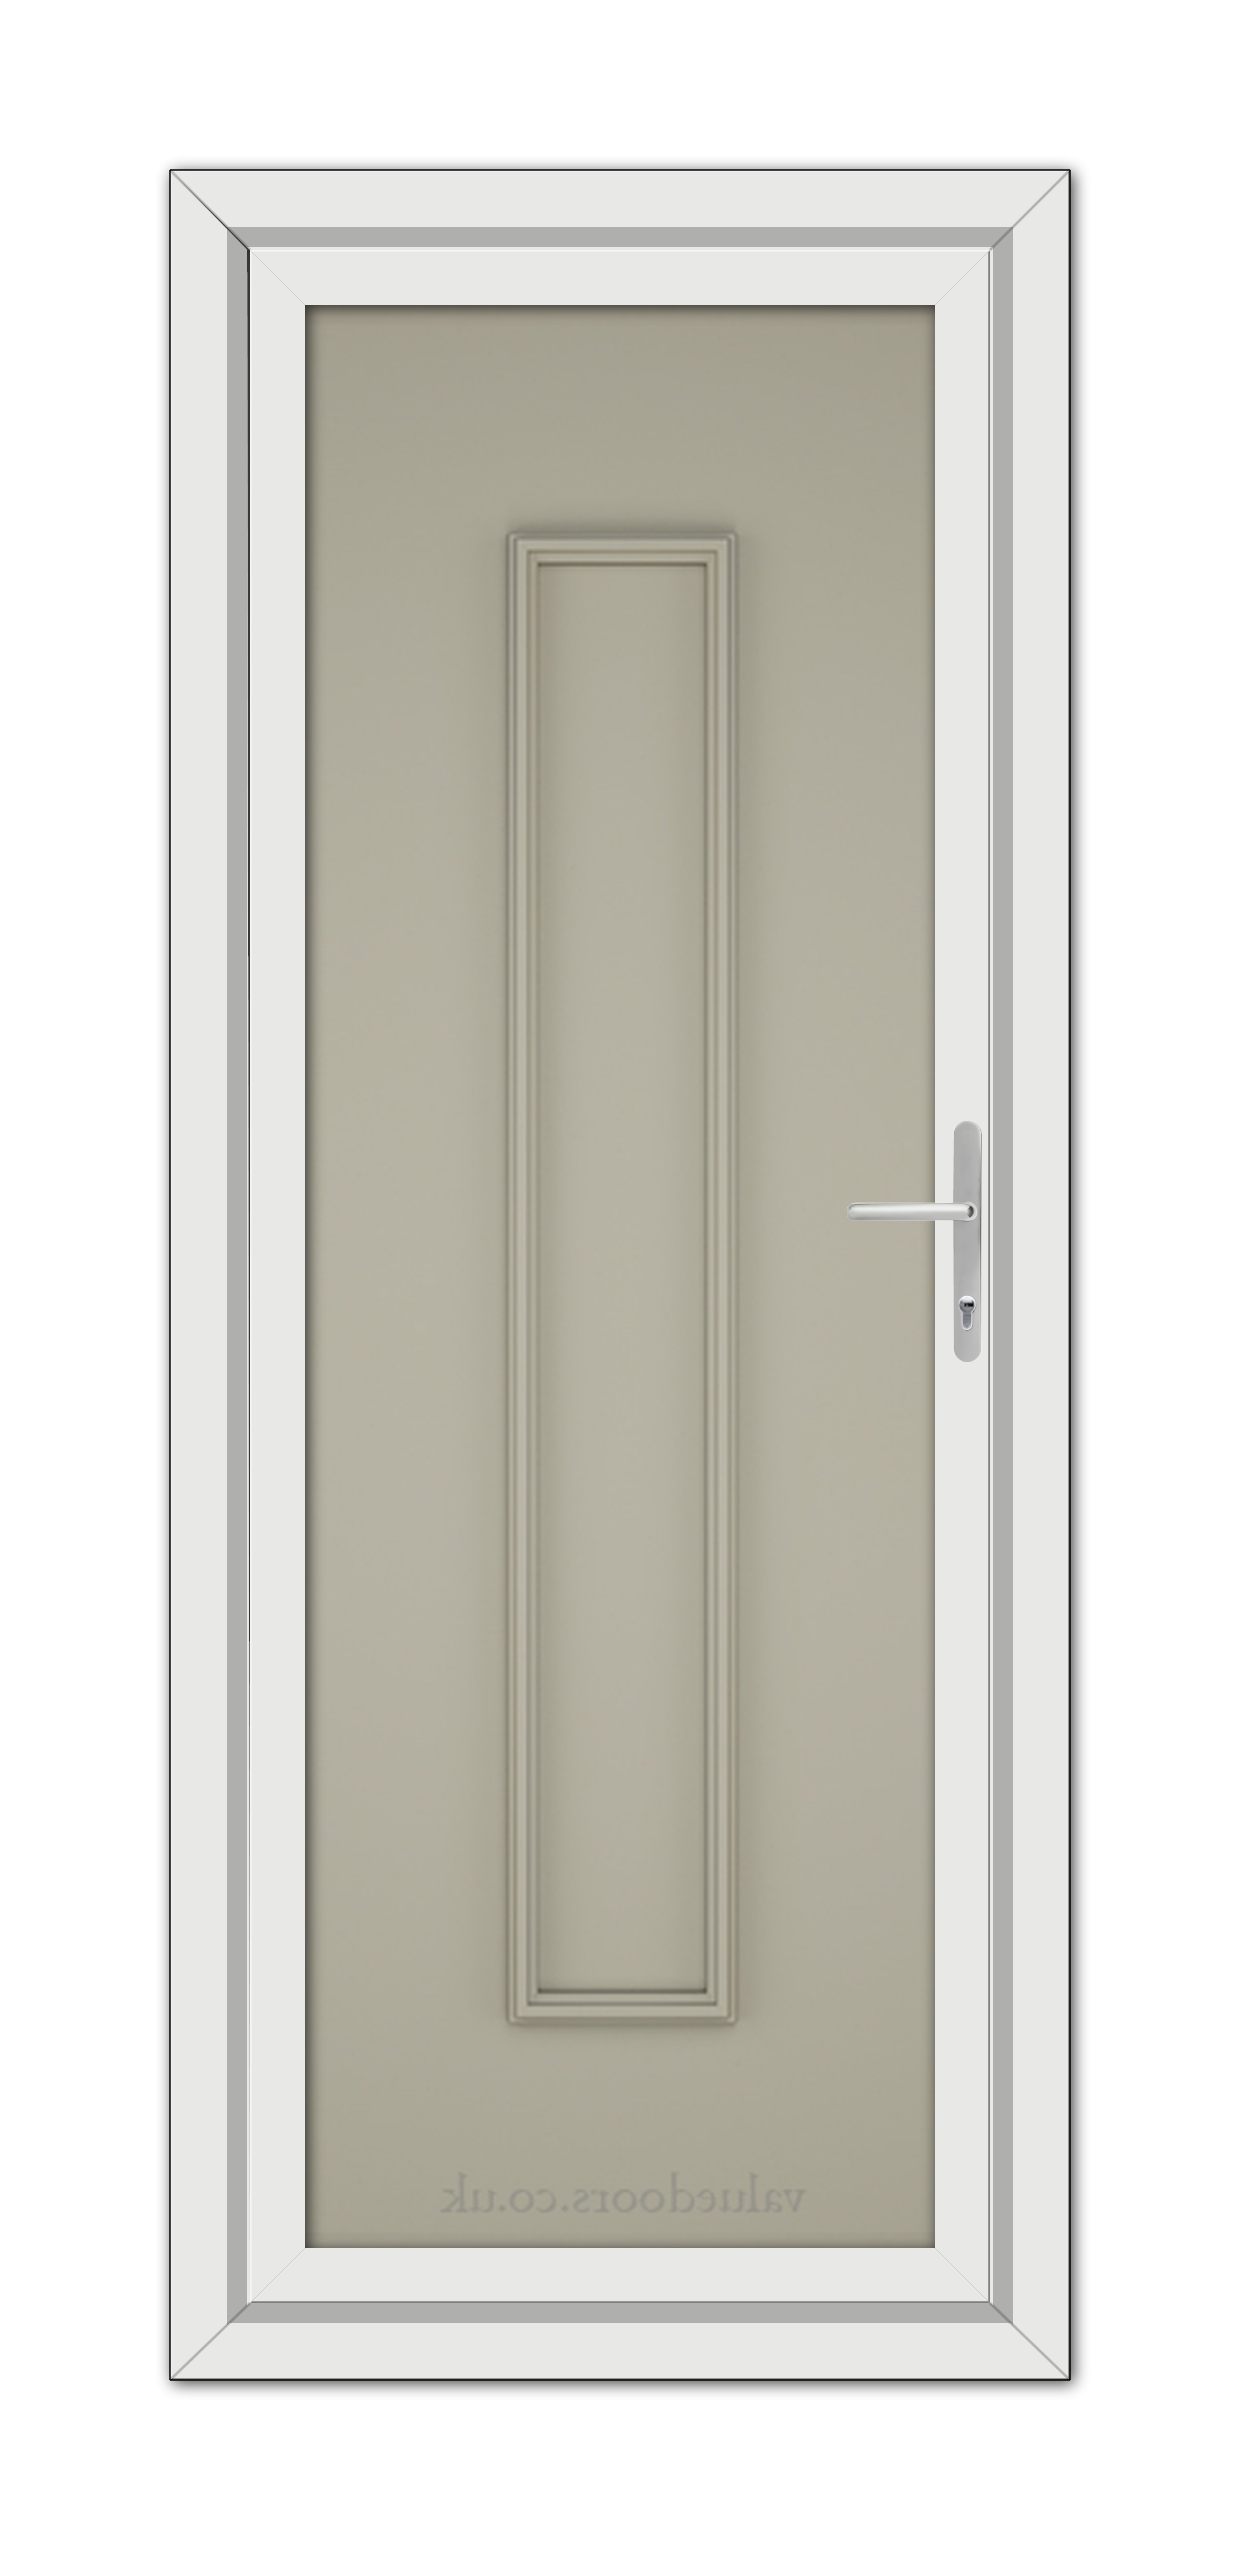 A vertical image depicting a modern, closed, Pebble Grey Rome Solid uPVC Door with a silver handle, set within a white frame.